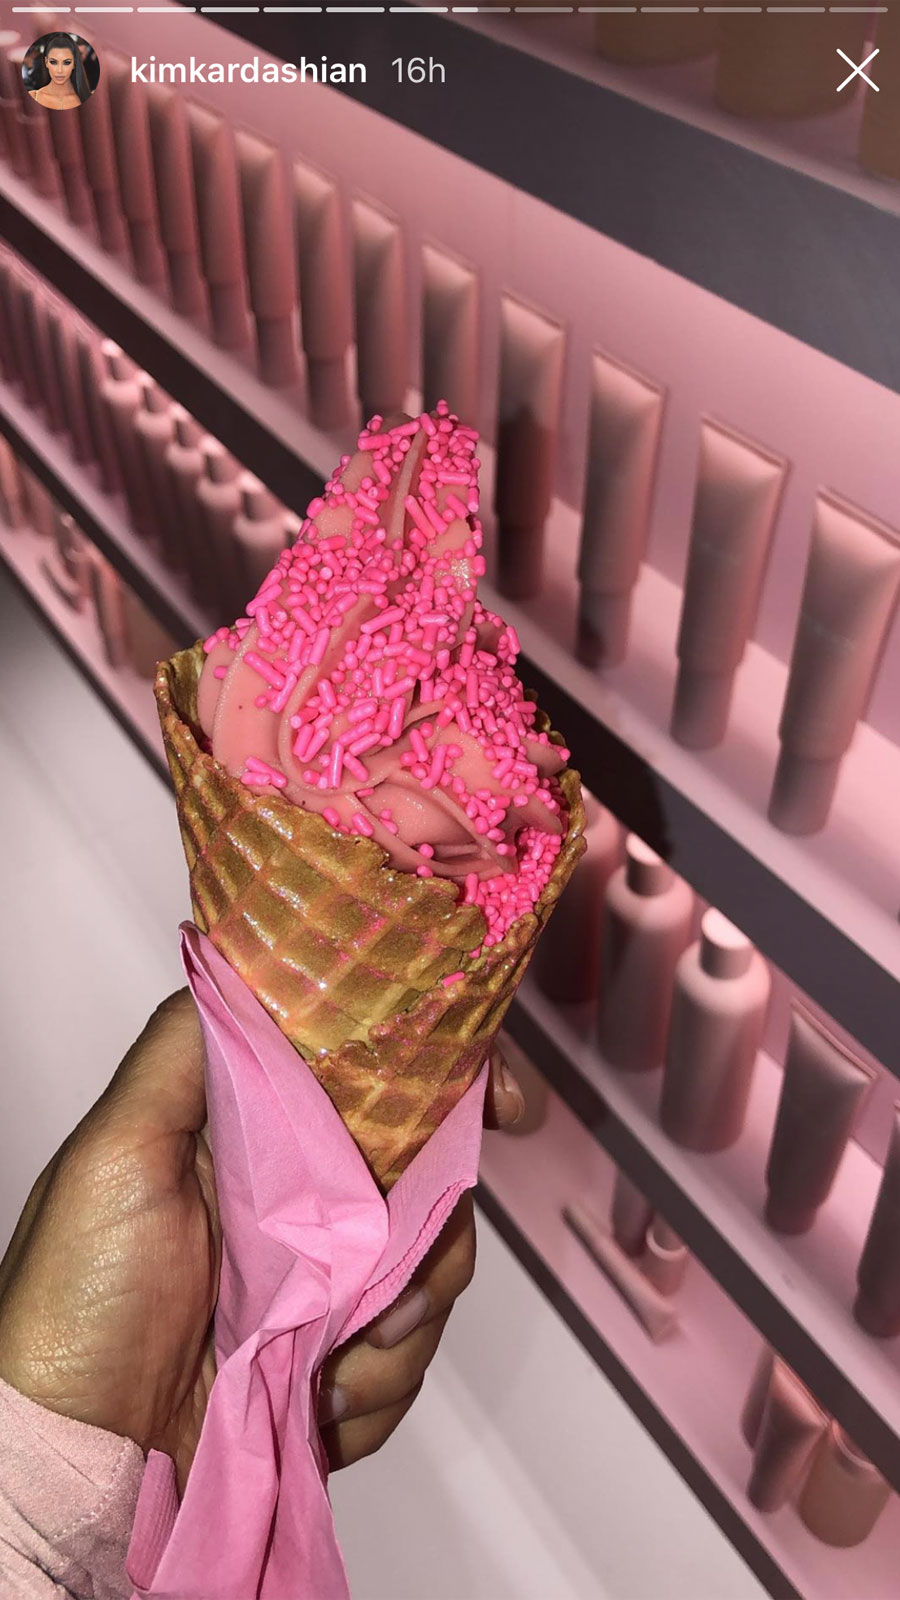 All the Food at Kylie Jenner's KylieSkin Launch Party Was Pink